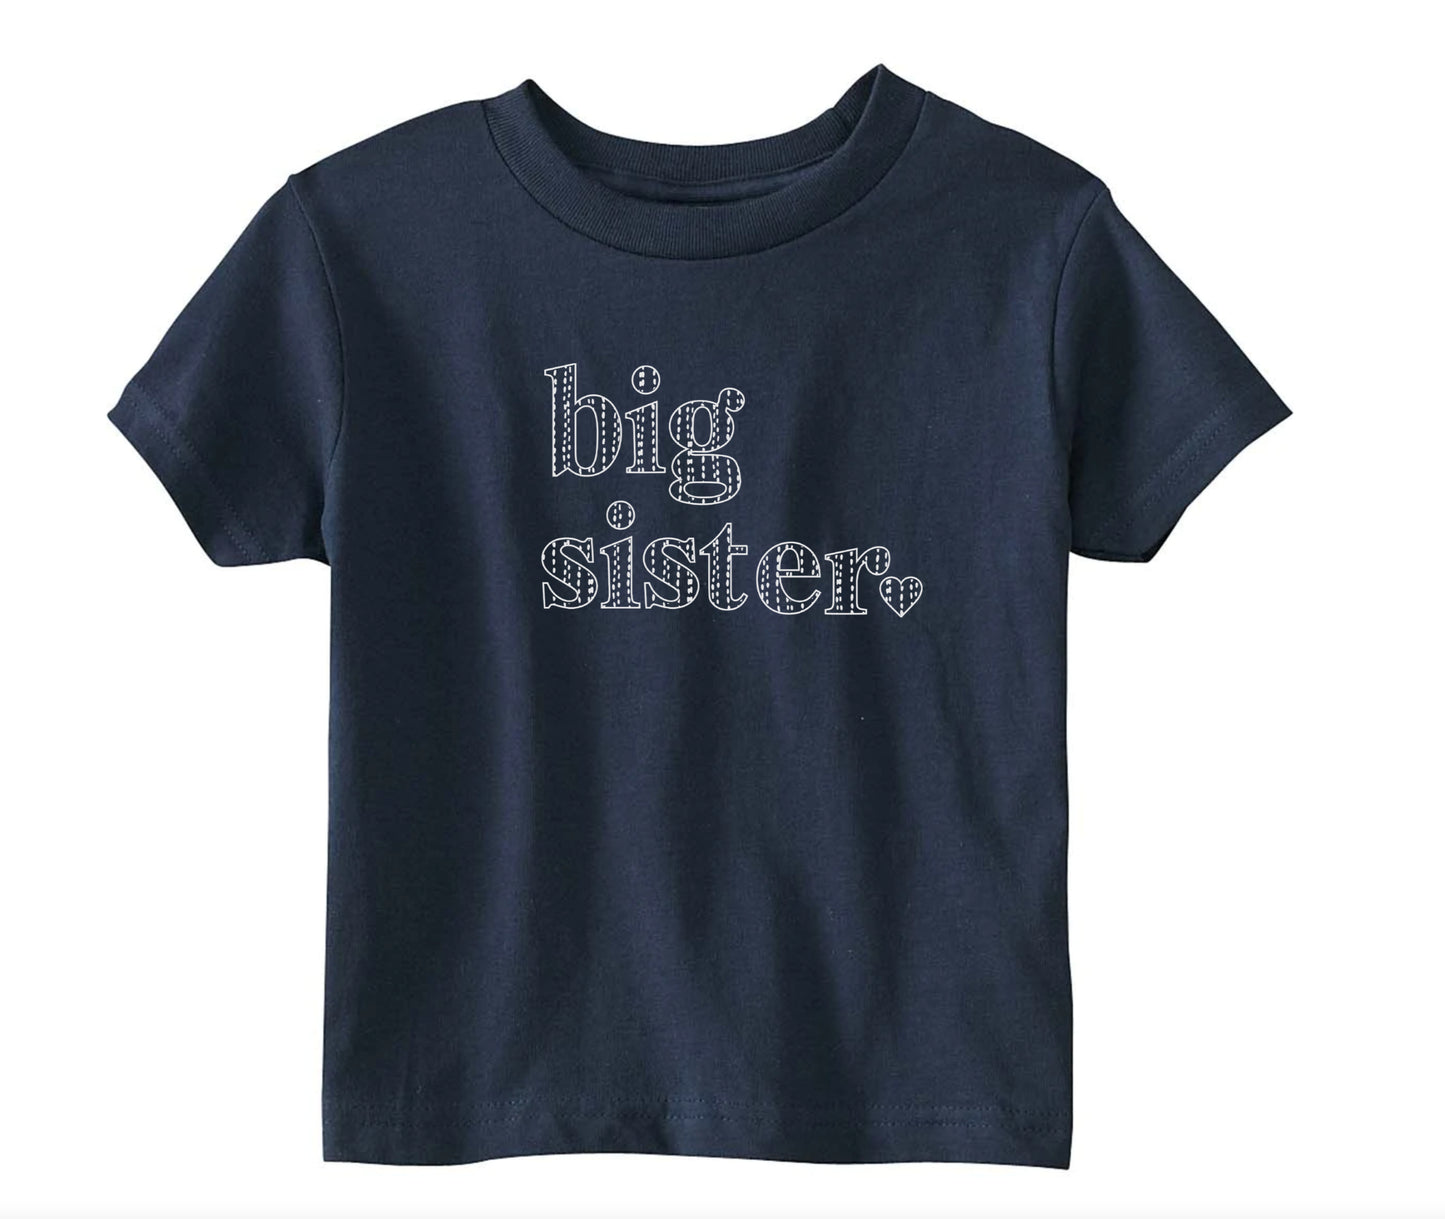 Big Sister , Kid shirt, Navy, Baby shower gift, casual, Match with Mommy, Match with sibling, Luna Print